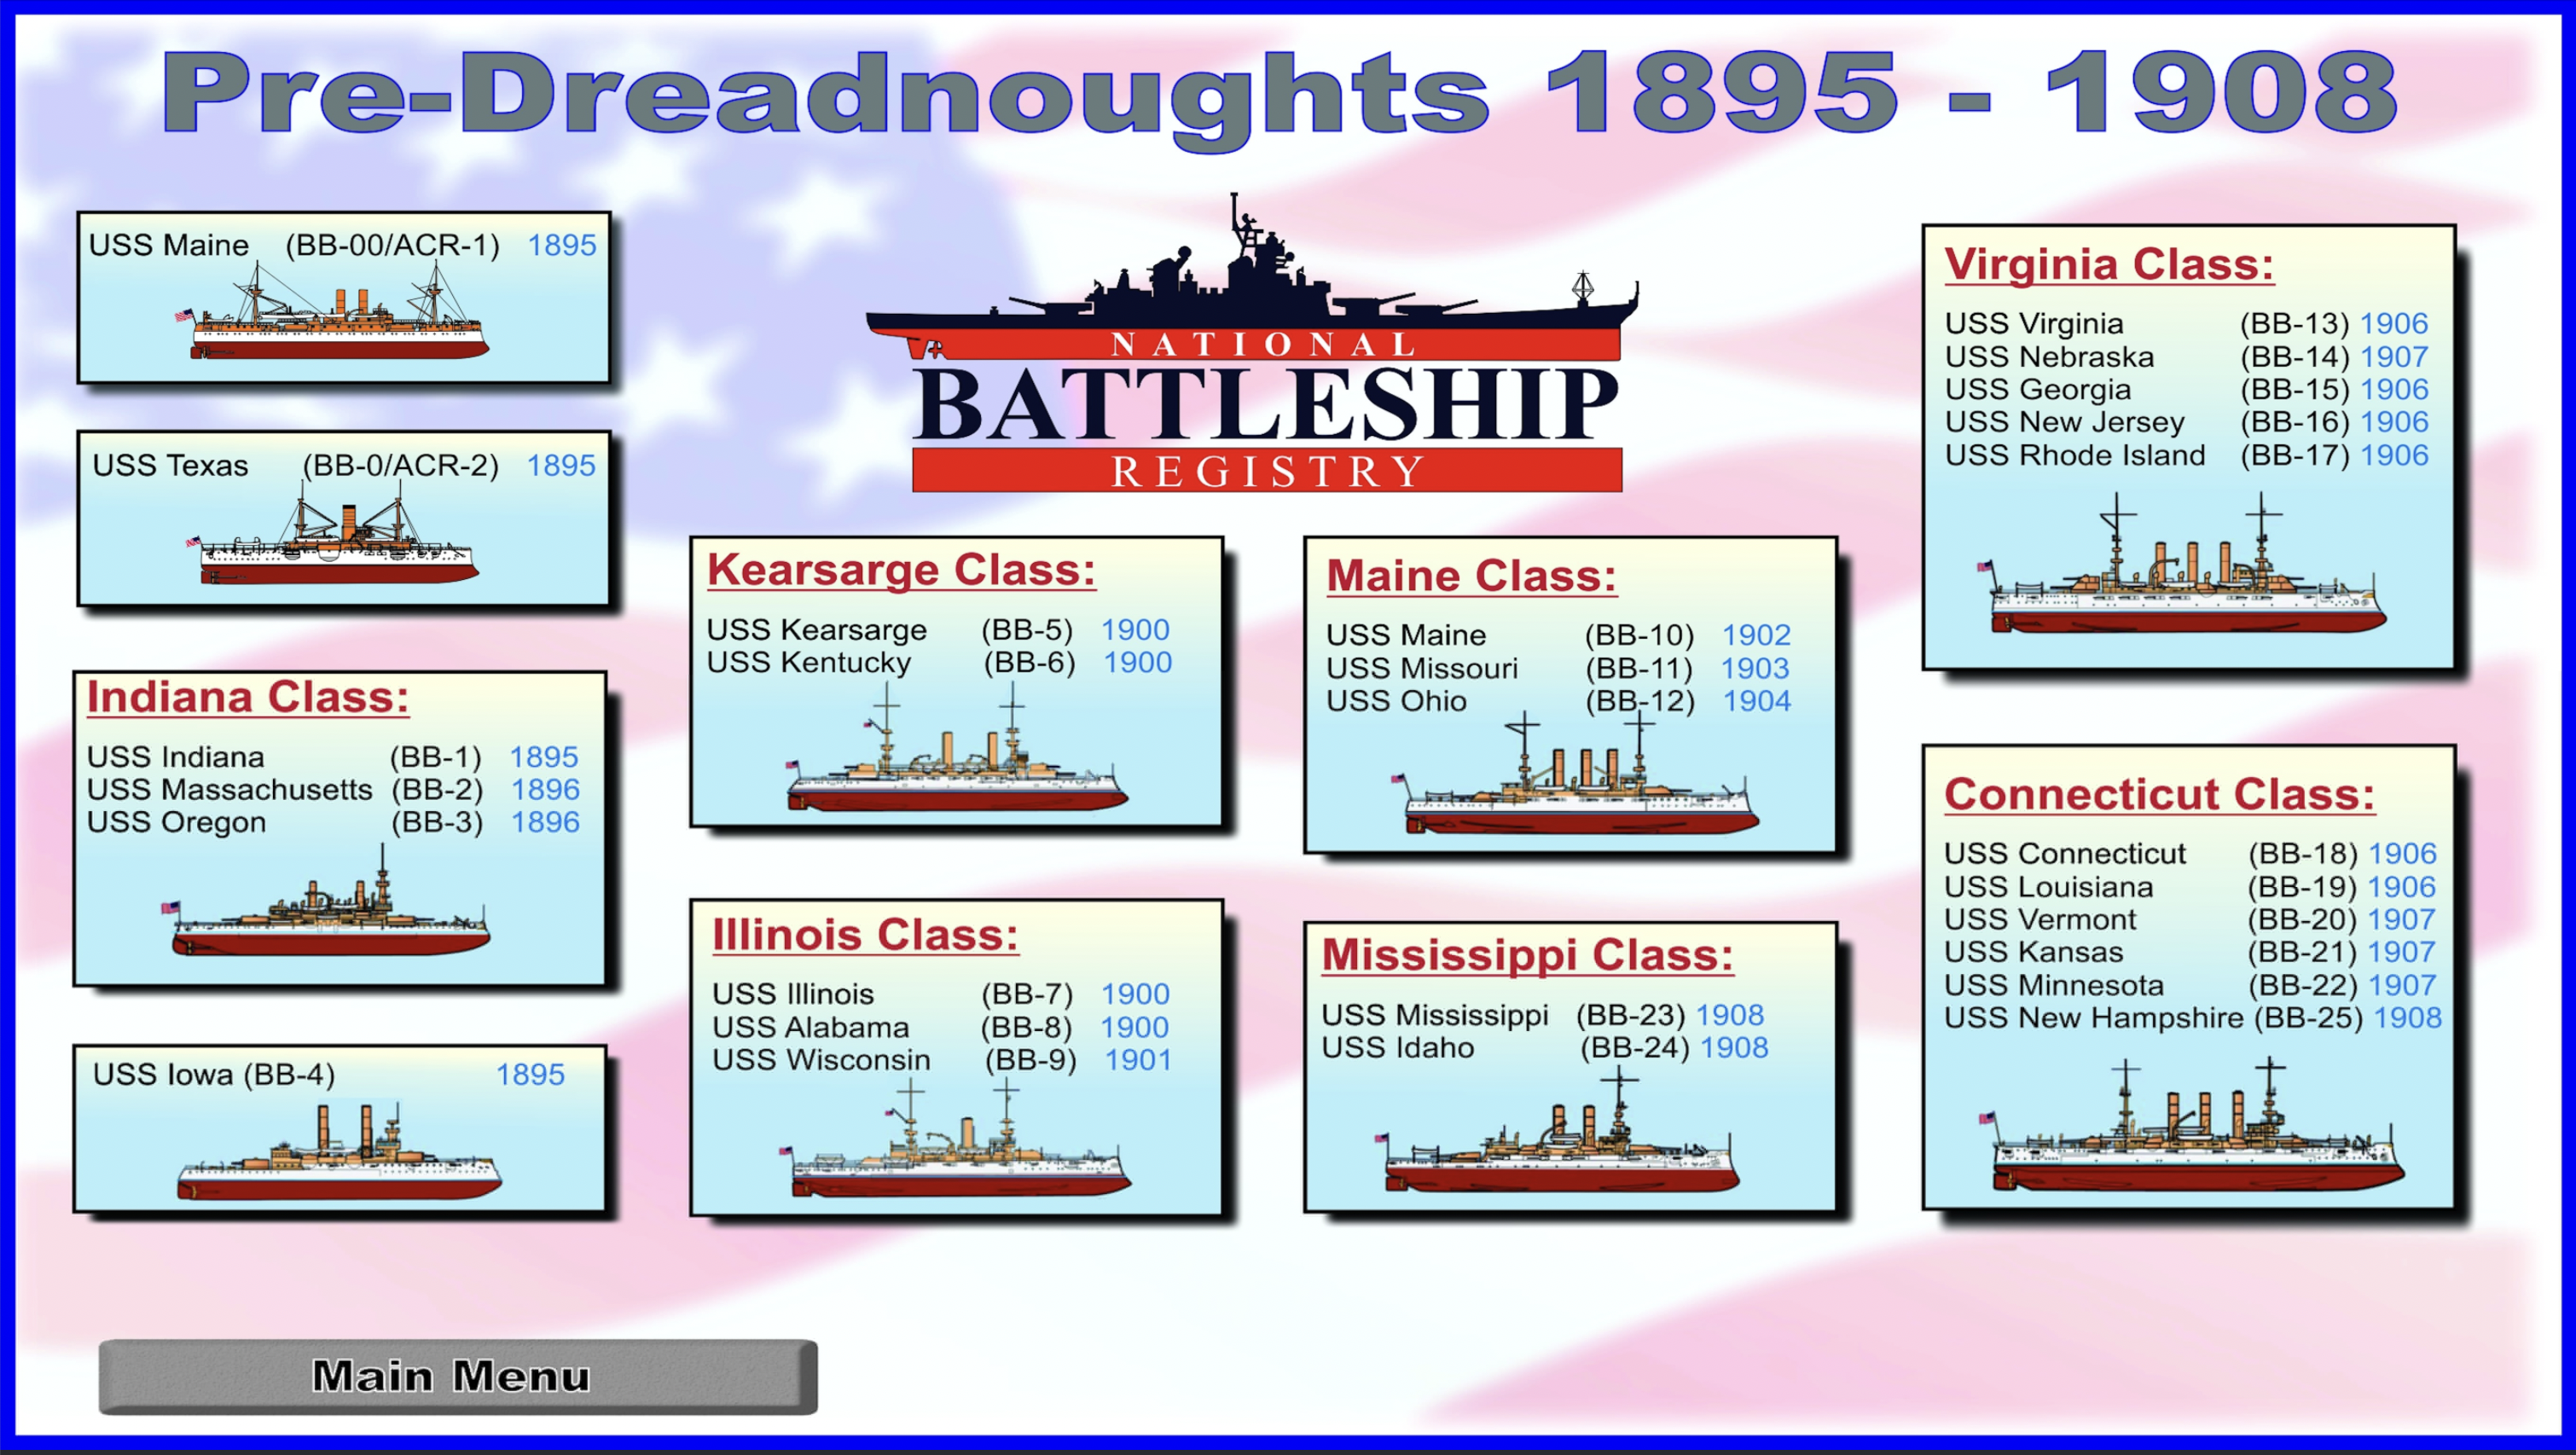 A screenshot of one of the Draw Attention images that composes a webpage for the National Battleship Registry